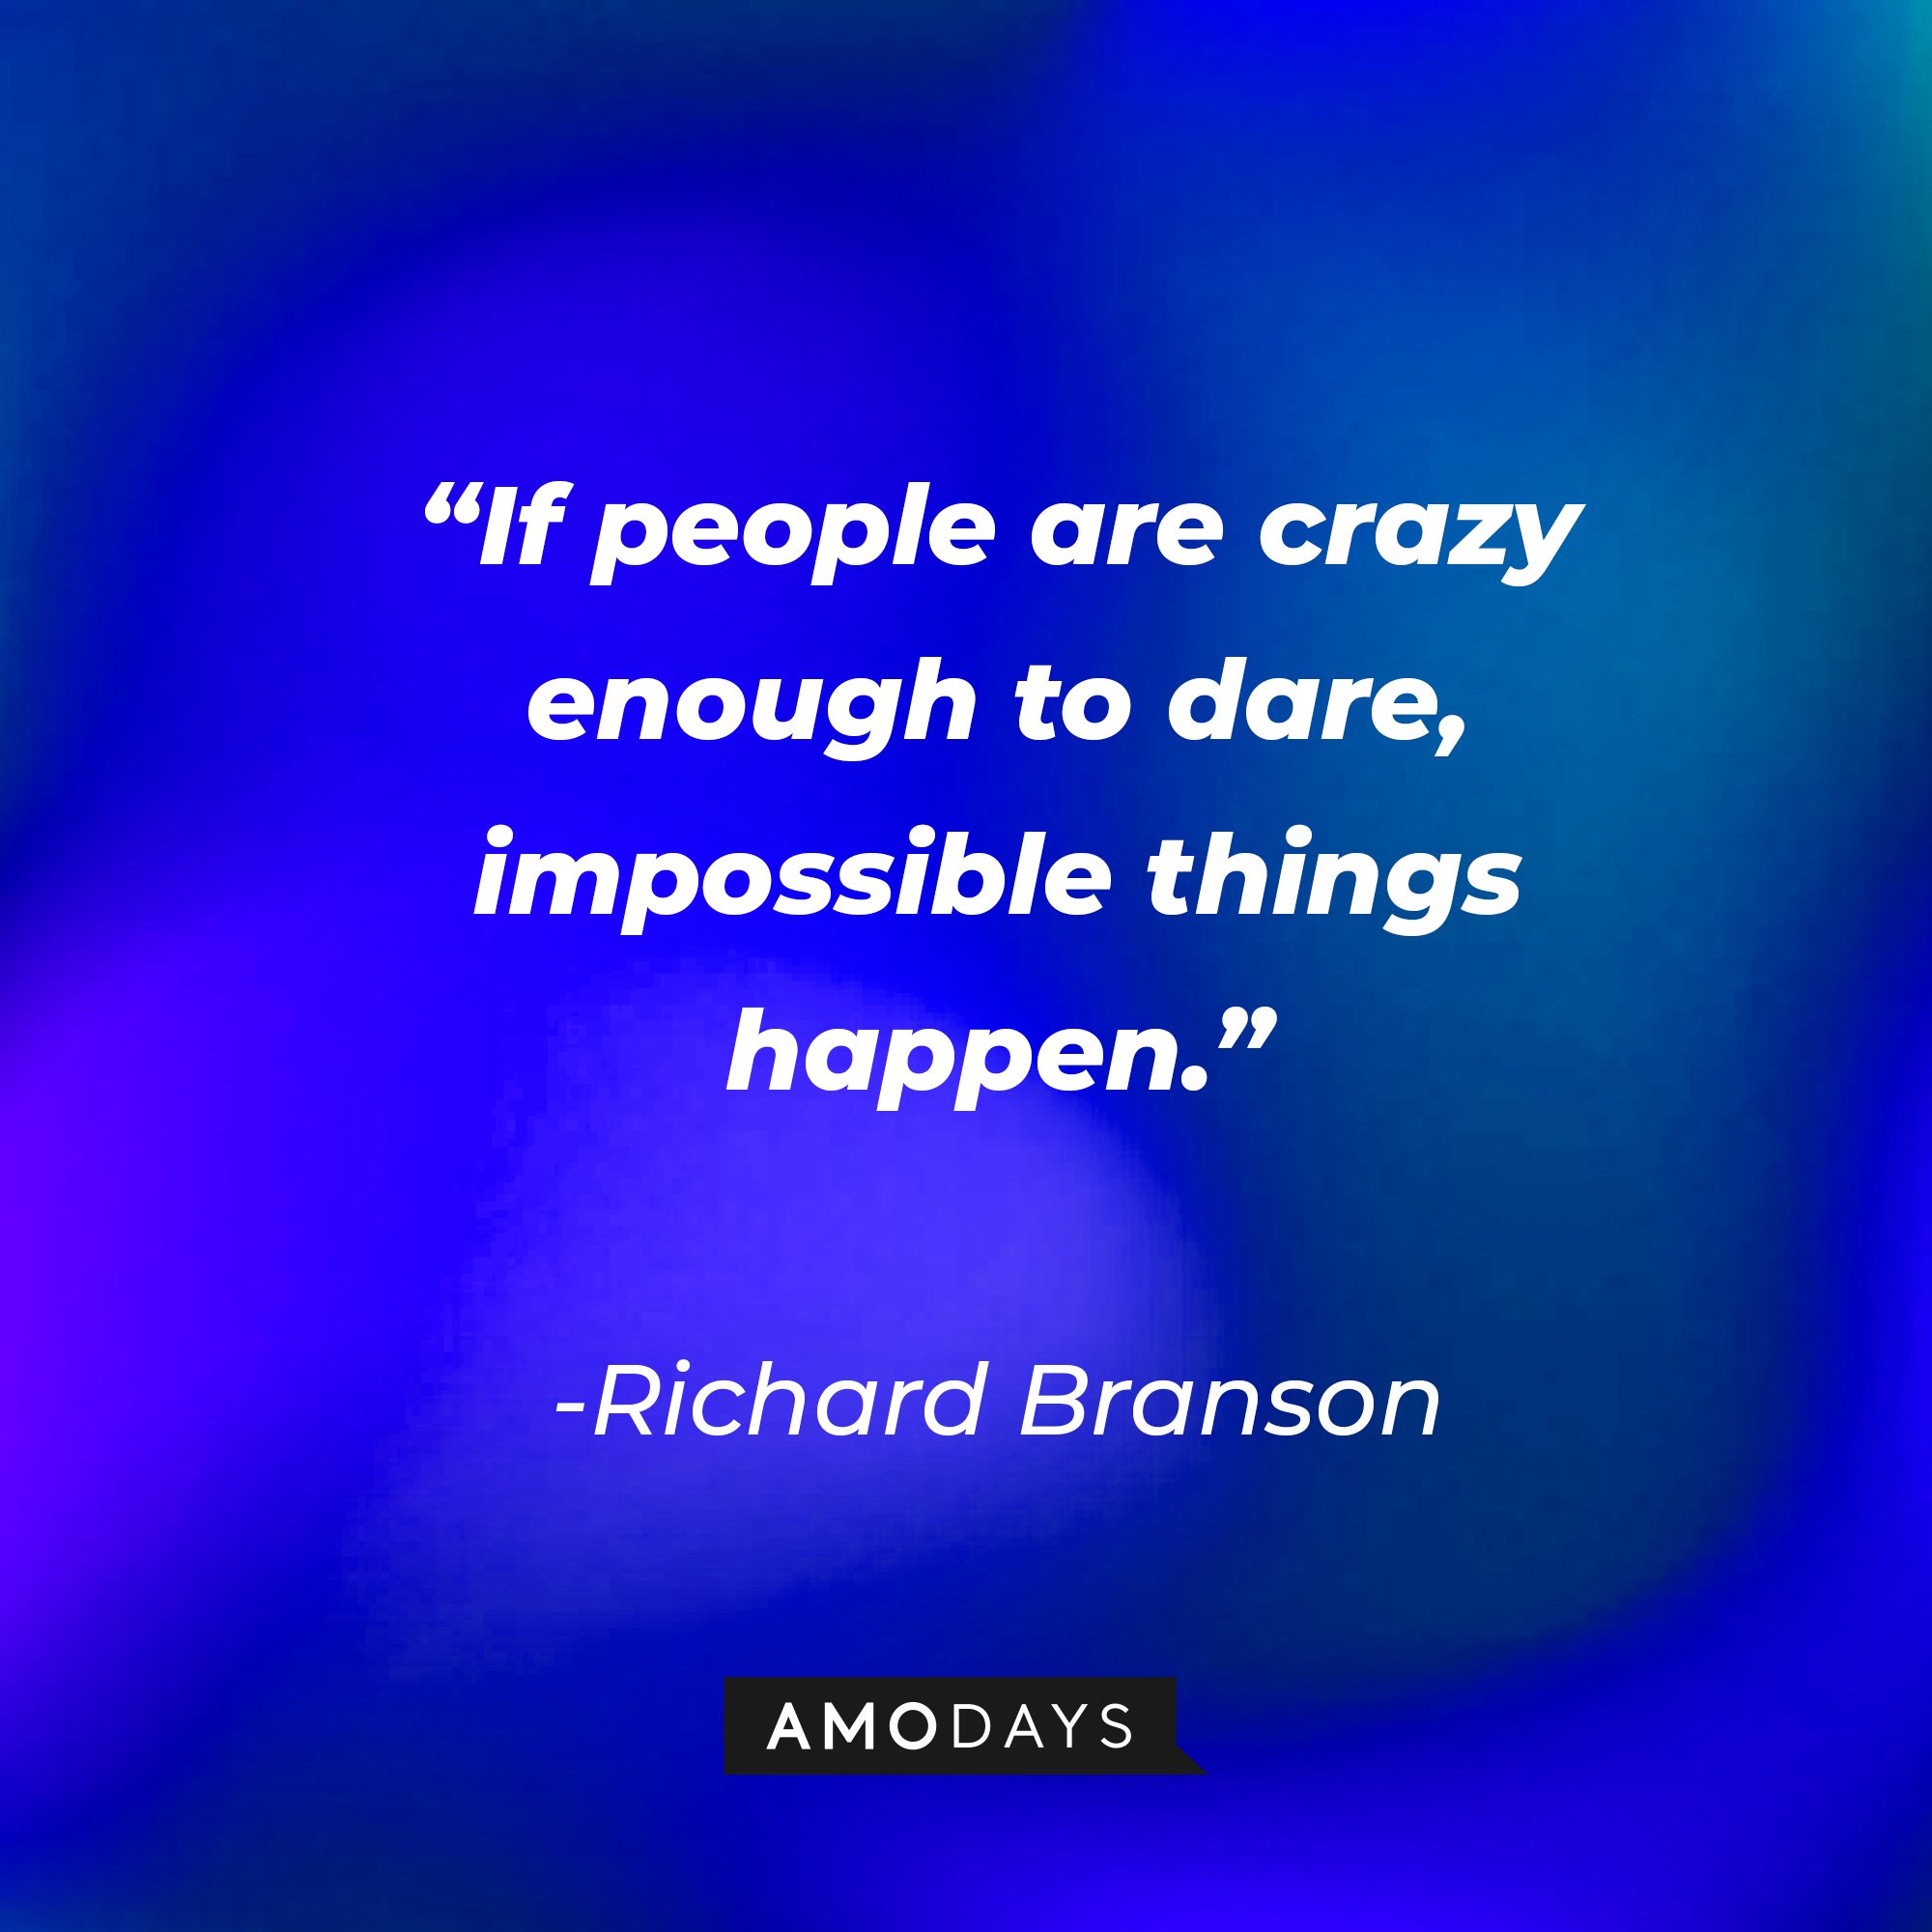 Richard Branson's quote: “If people are crazy enough to dare, impossible things happen.” | Image: AmoDays